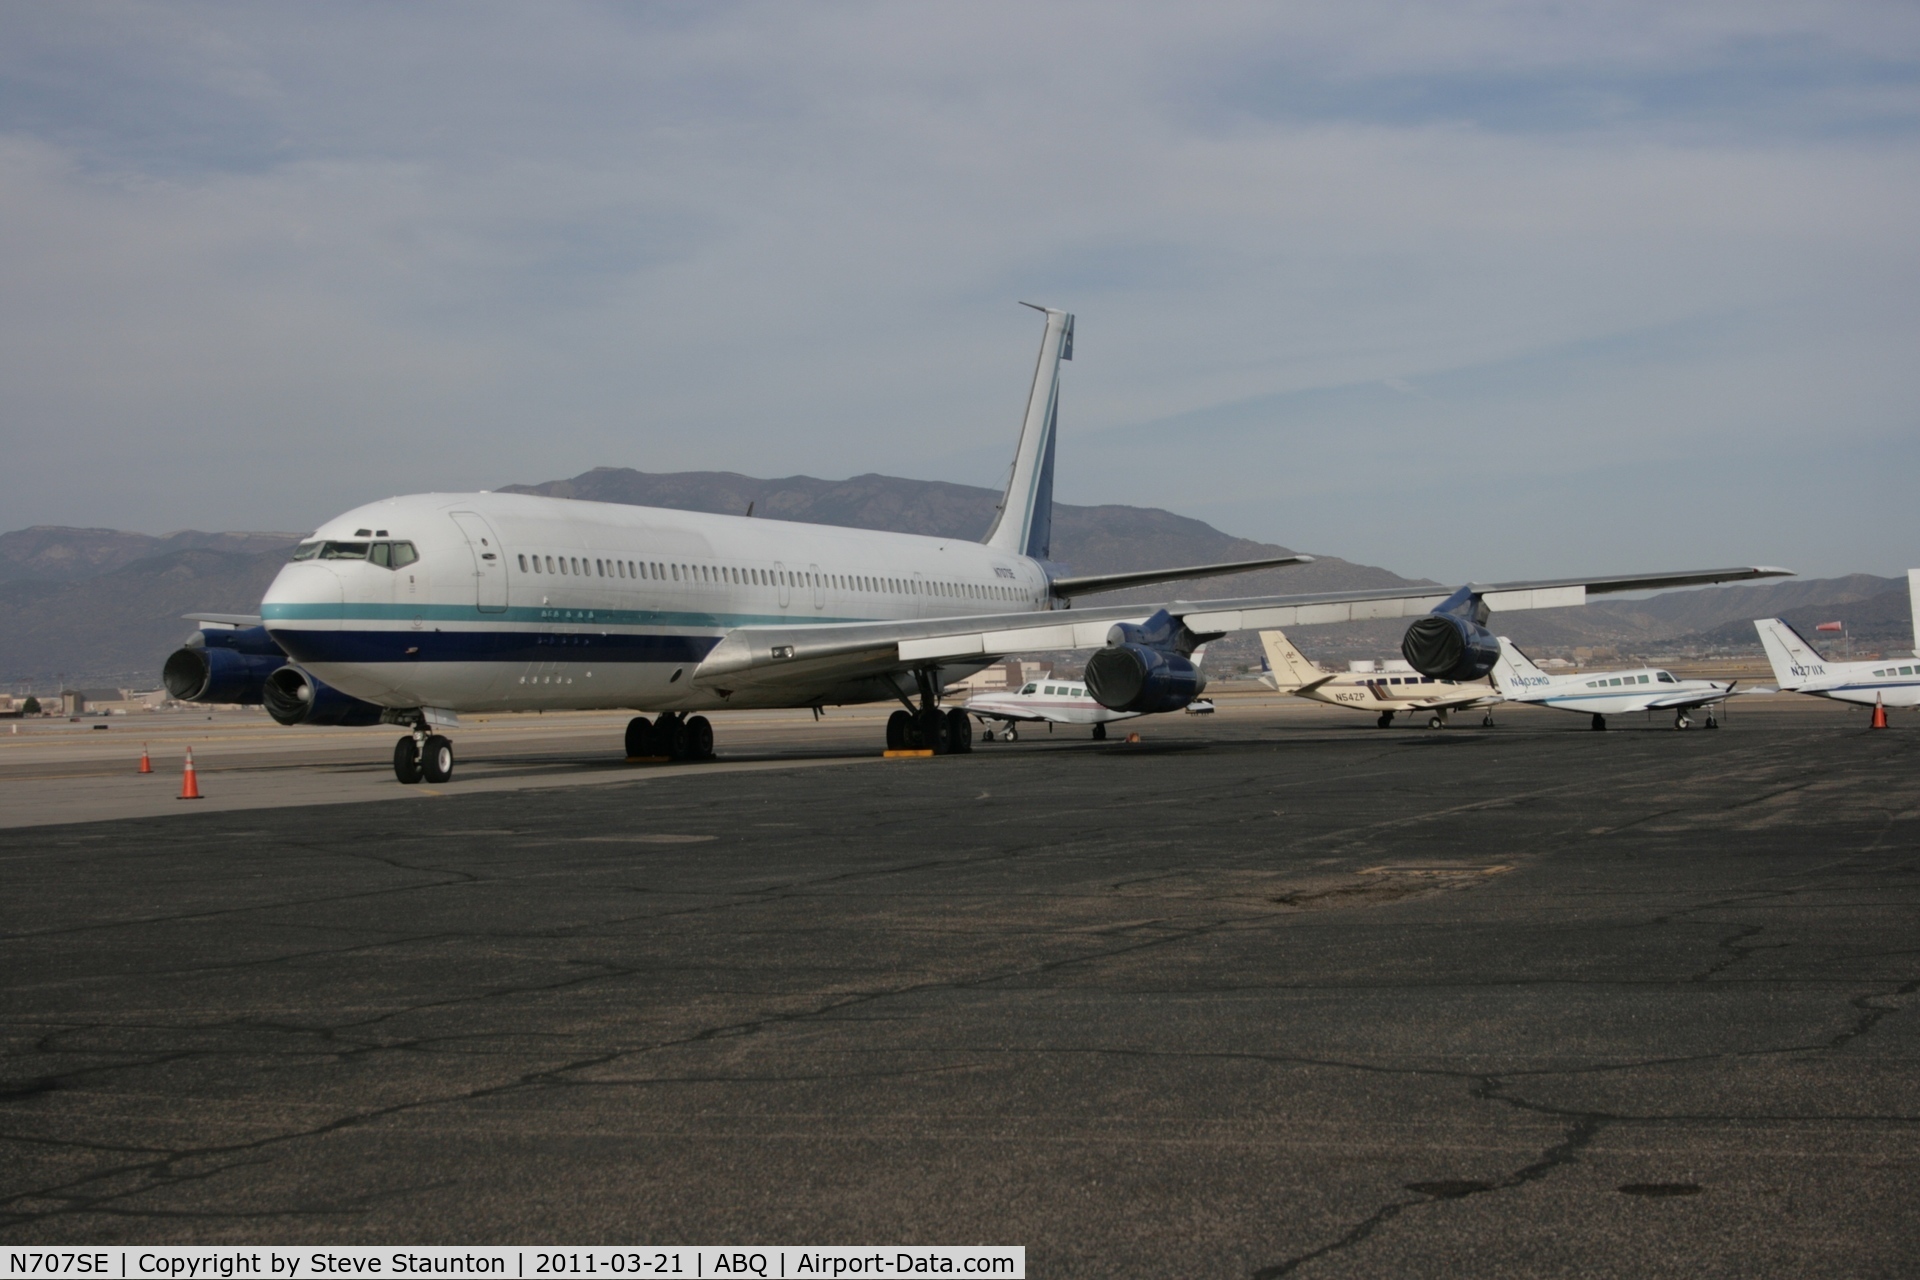 N707SE, 1967 Boeing 707-328C C/N 19522, Taken at Alburquerque International Sunport Airport, New Mexico in March 2011 whilst on an Aeroprint Aviation tour